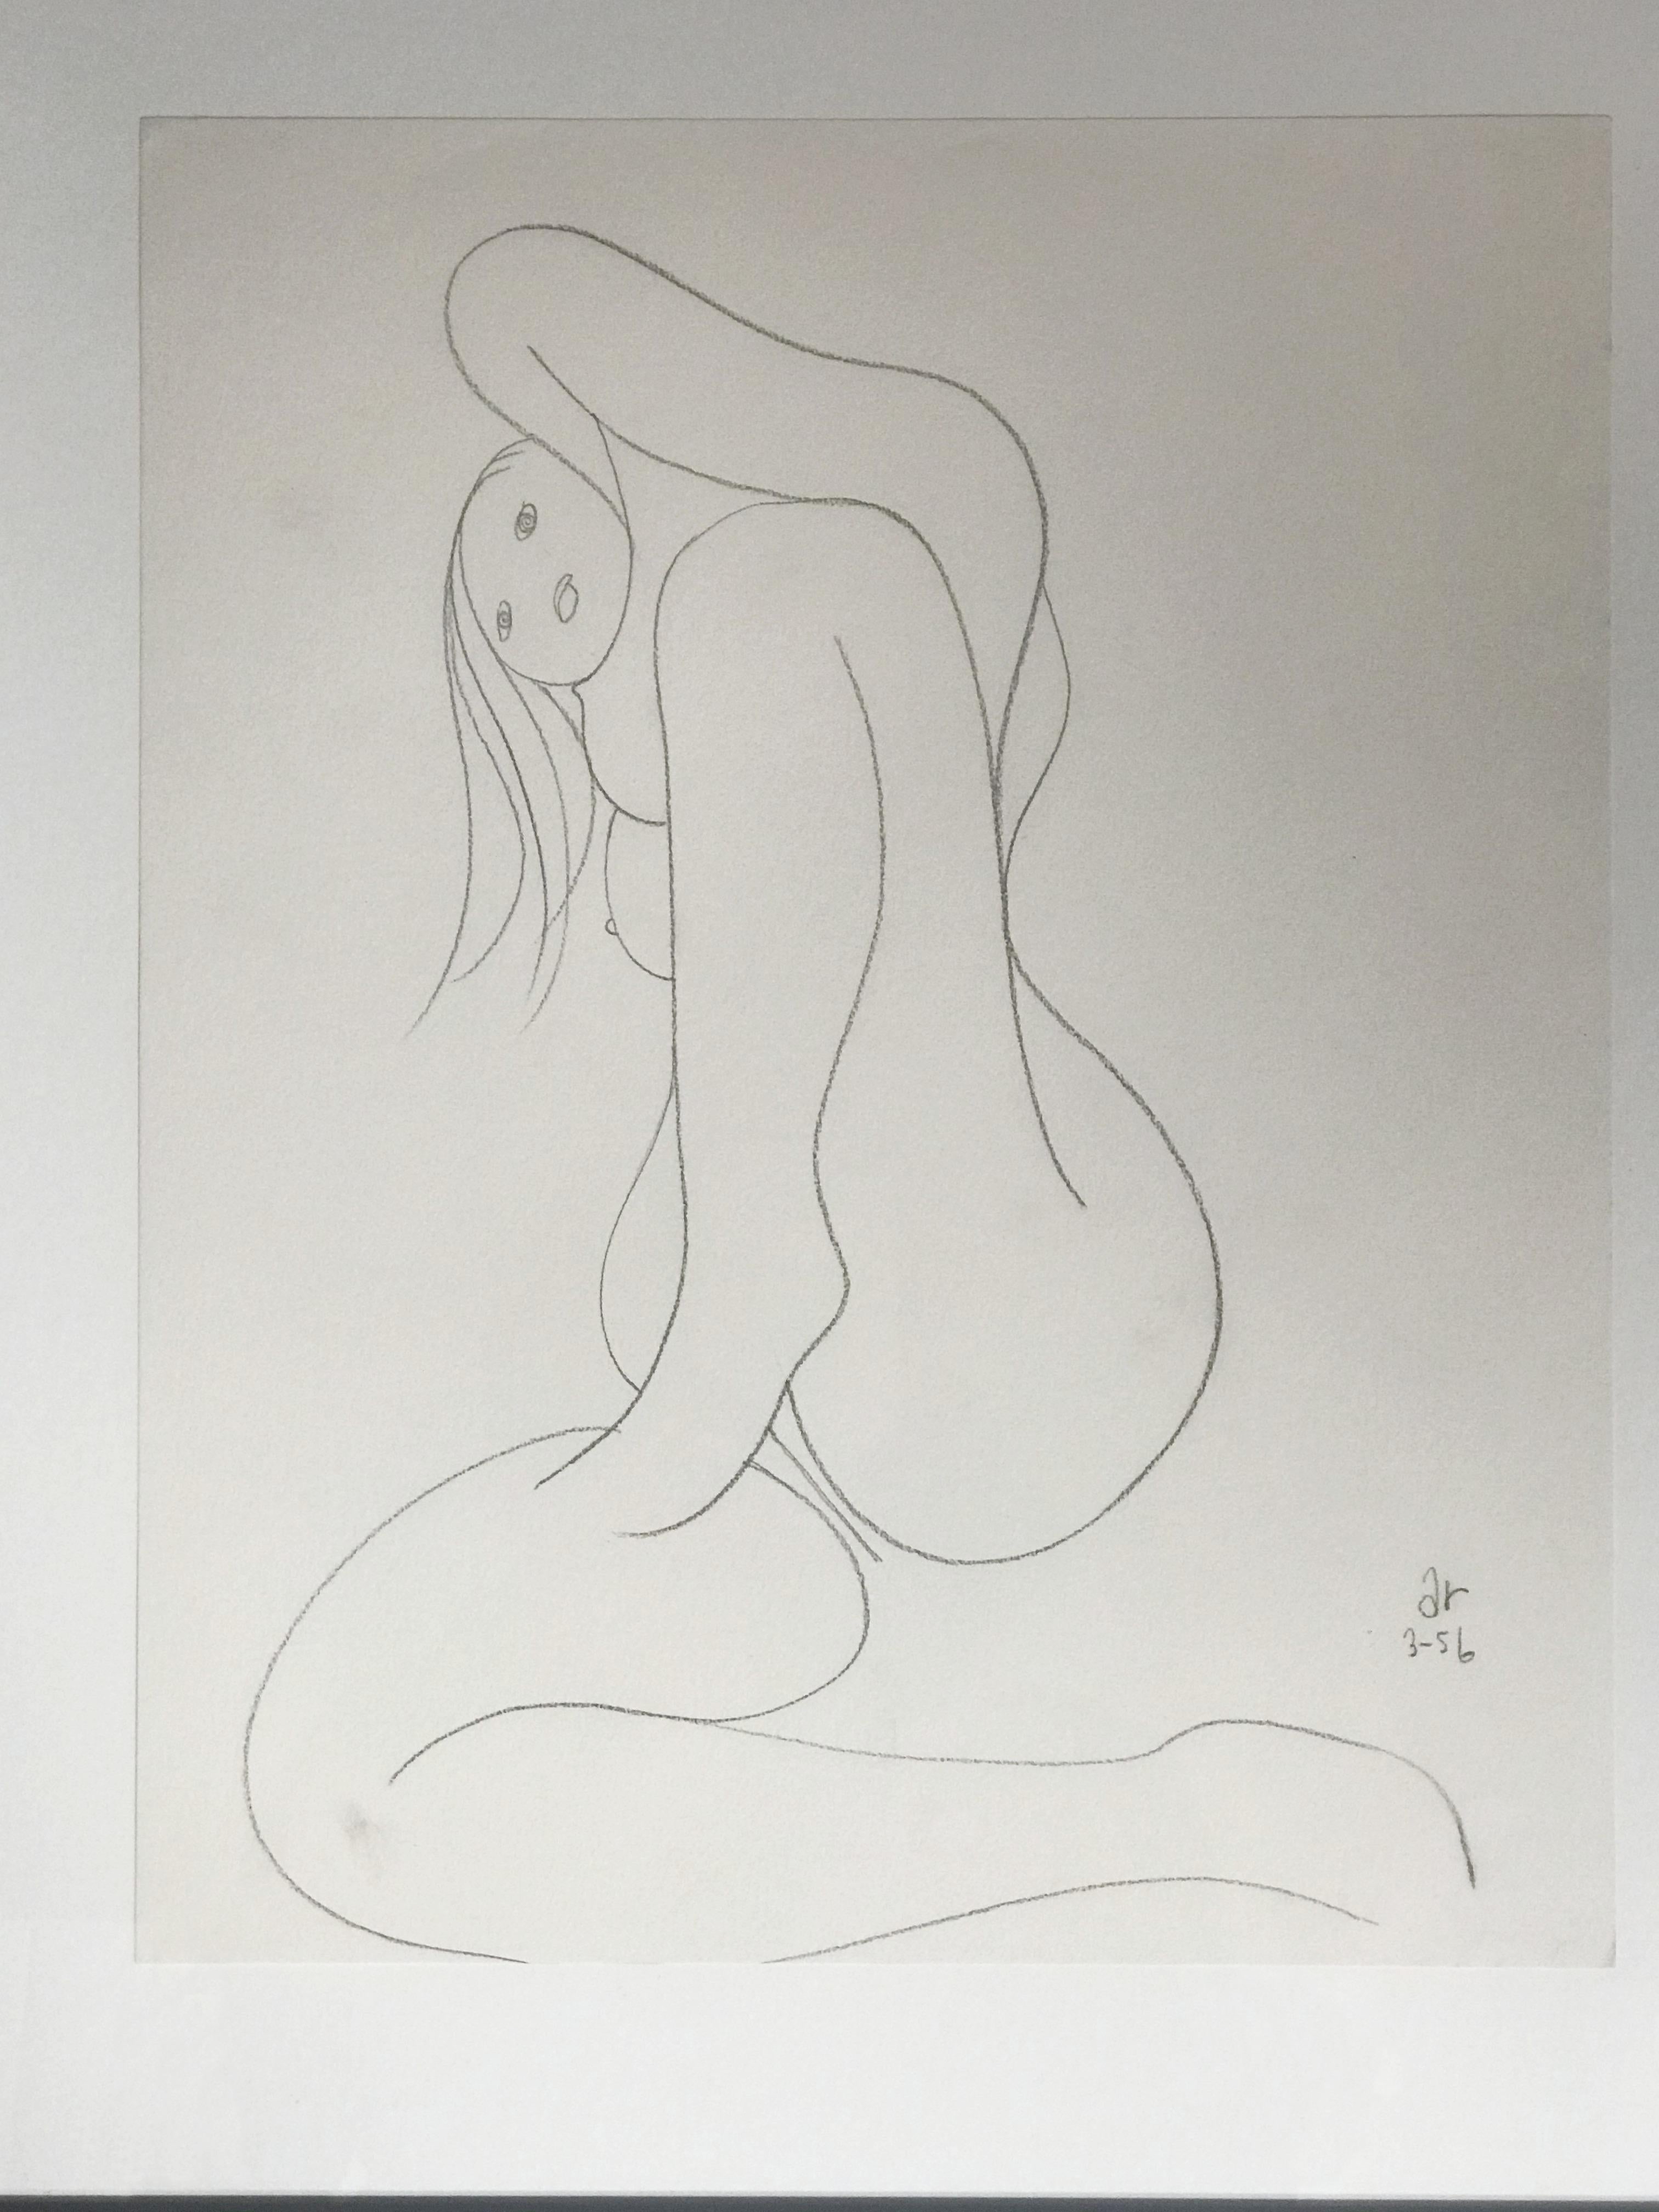 So refined single line drawing of a girl by Albert Radoczy.
Part of a series of 6 but it can be sold individually.
I added one picture of the other drawings composing the series.